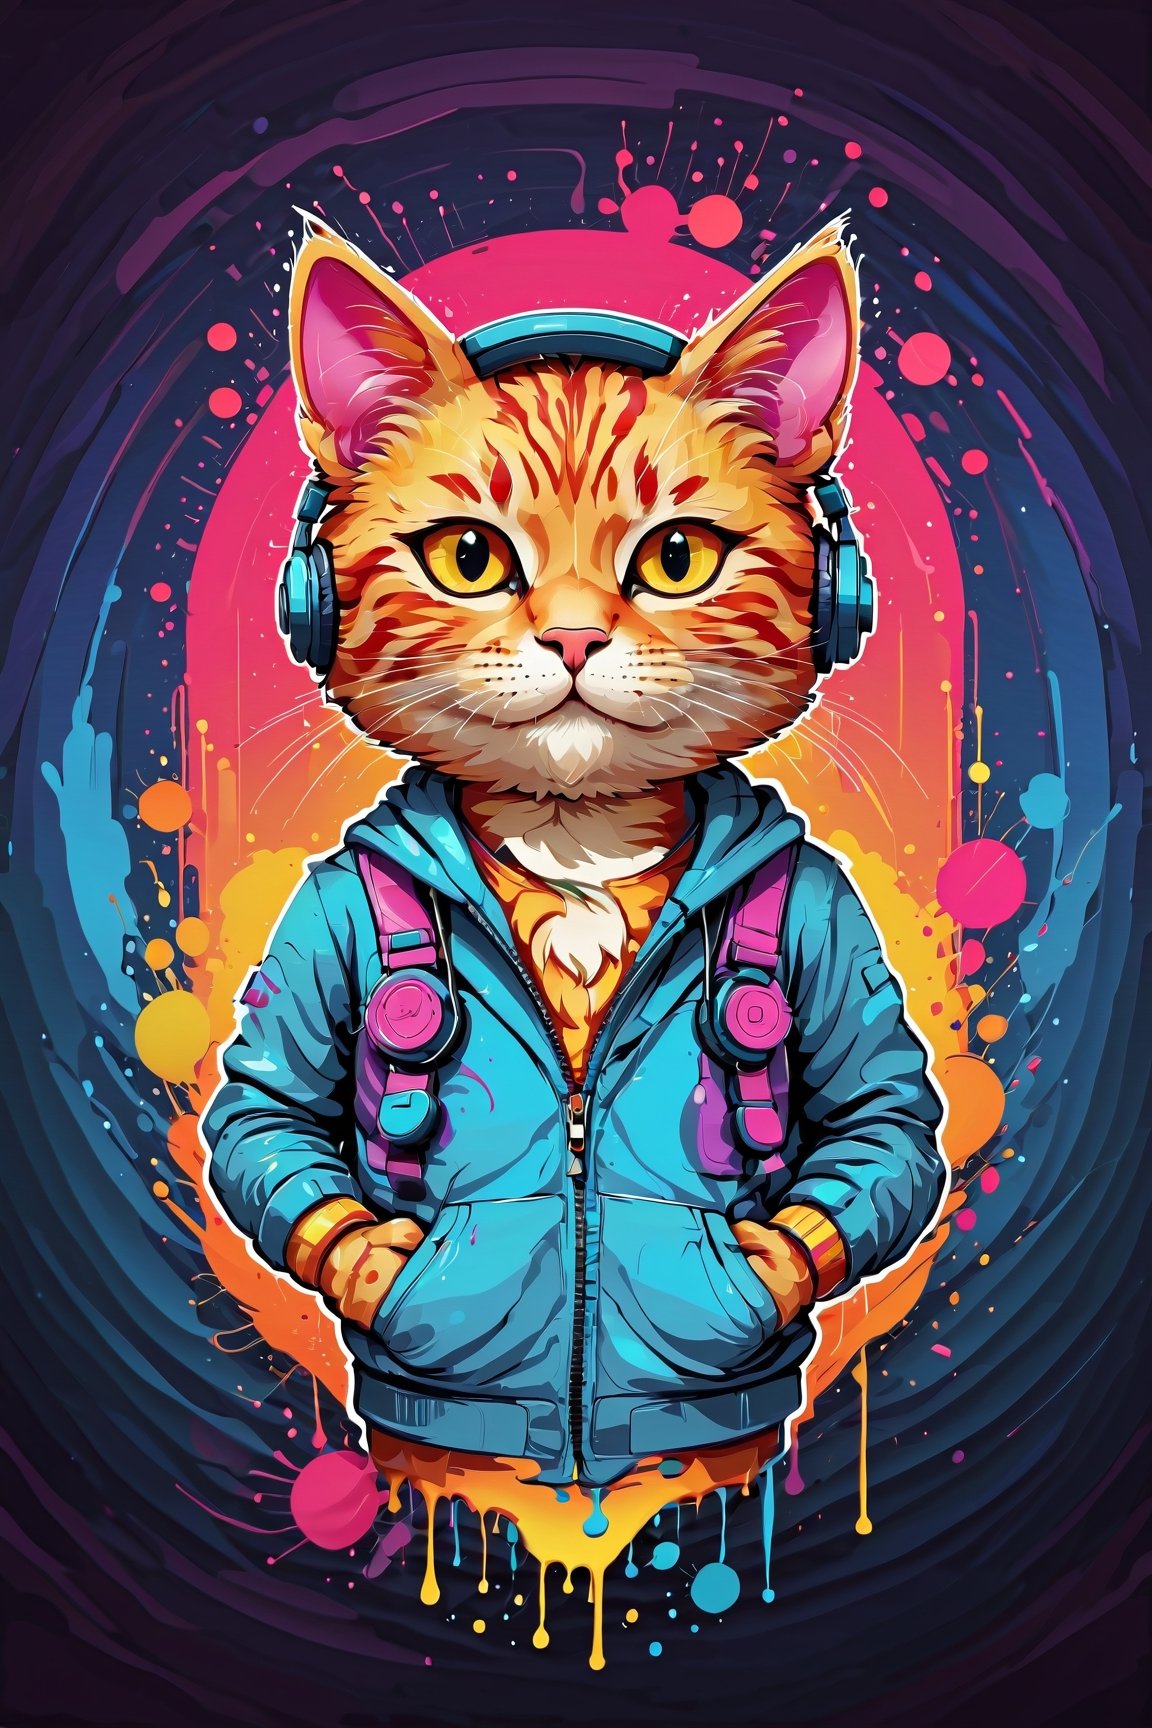 Logo business neon colors, cartoon style illustration gamer cat with headphones, with splashy neon colors, creating a vibrant and dynamic visual impact. The design should evoke a sense of energy and style, with the colors dripping seamlessly to convey a bold and captivating aesthetic scene in vibrant , pro vector, high detail, t-shirt design, grafitti, vibrant, t-shirt less, best quality, wallpaper art, UHD, centered image, MSchiffer art, ((flat colors)), (cel-shading style) very bold neon colors, ((high saturation)) ink lines, clean background environment

